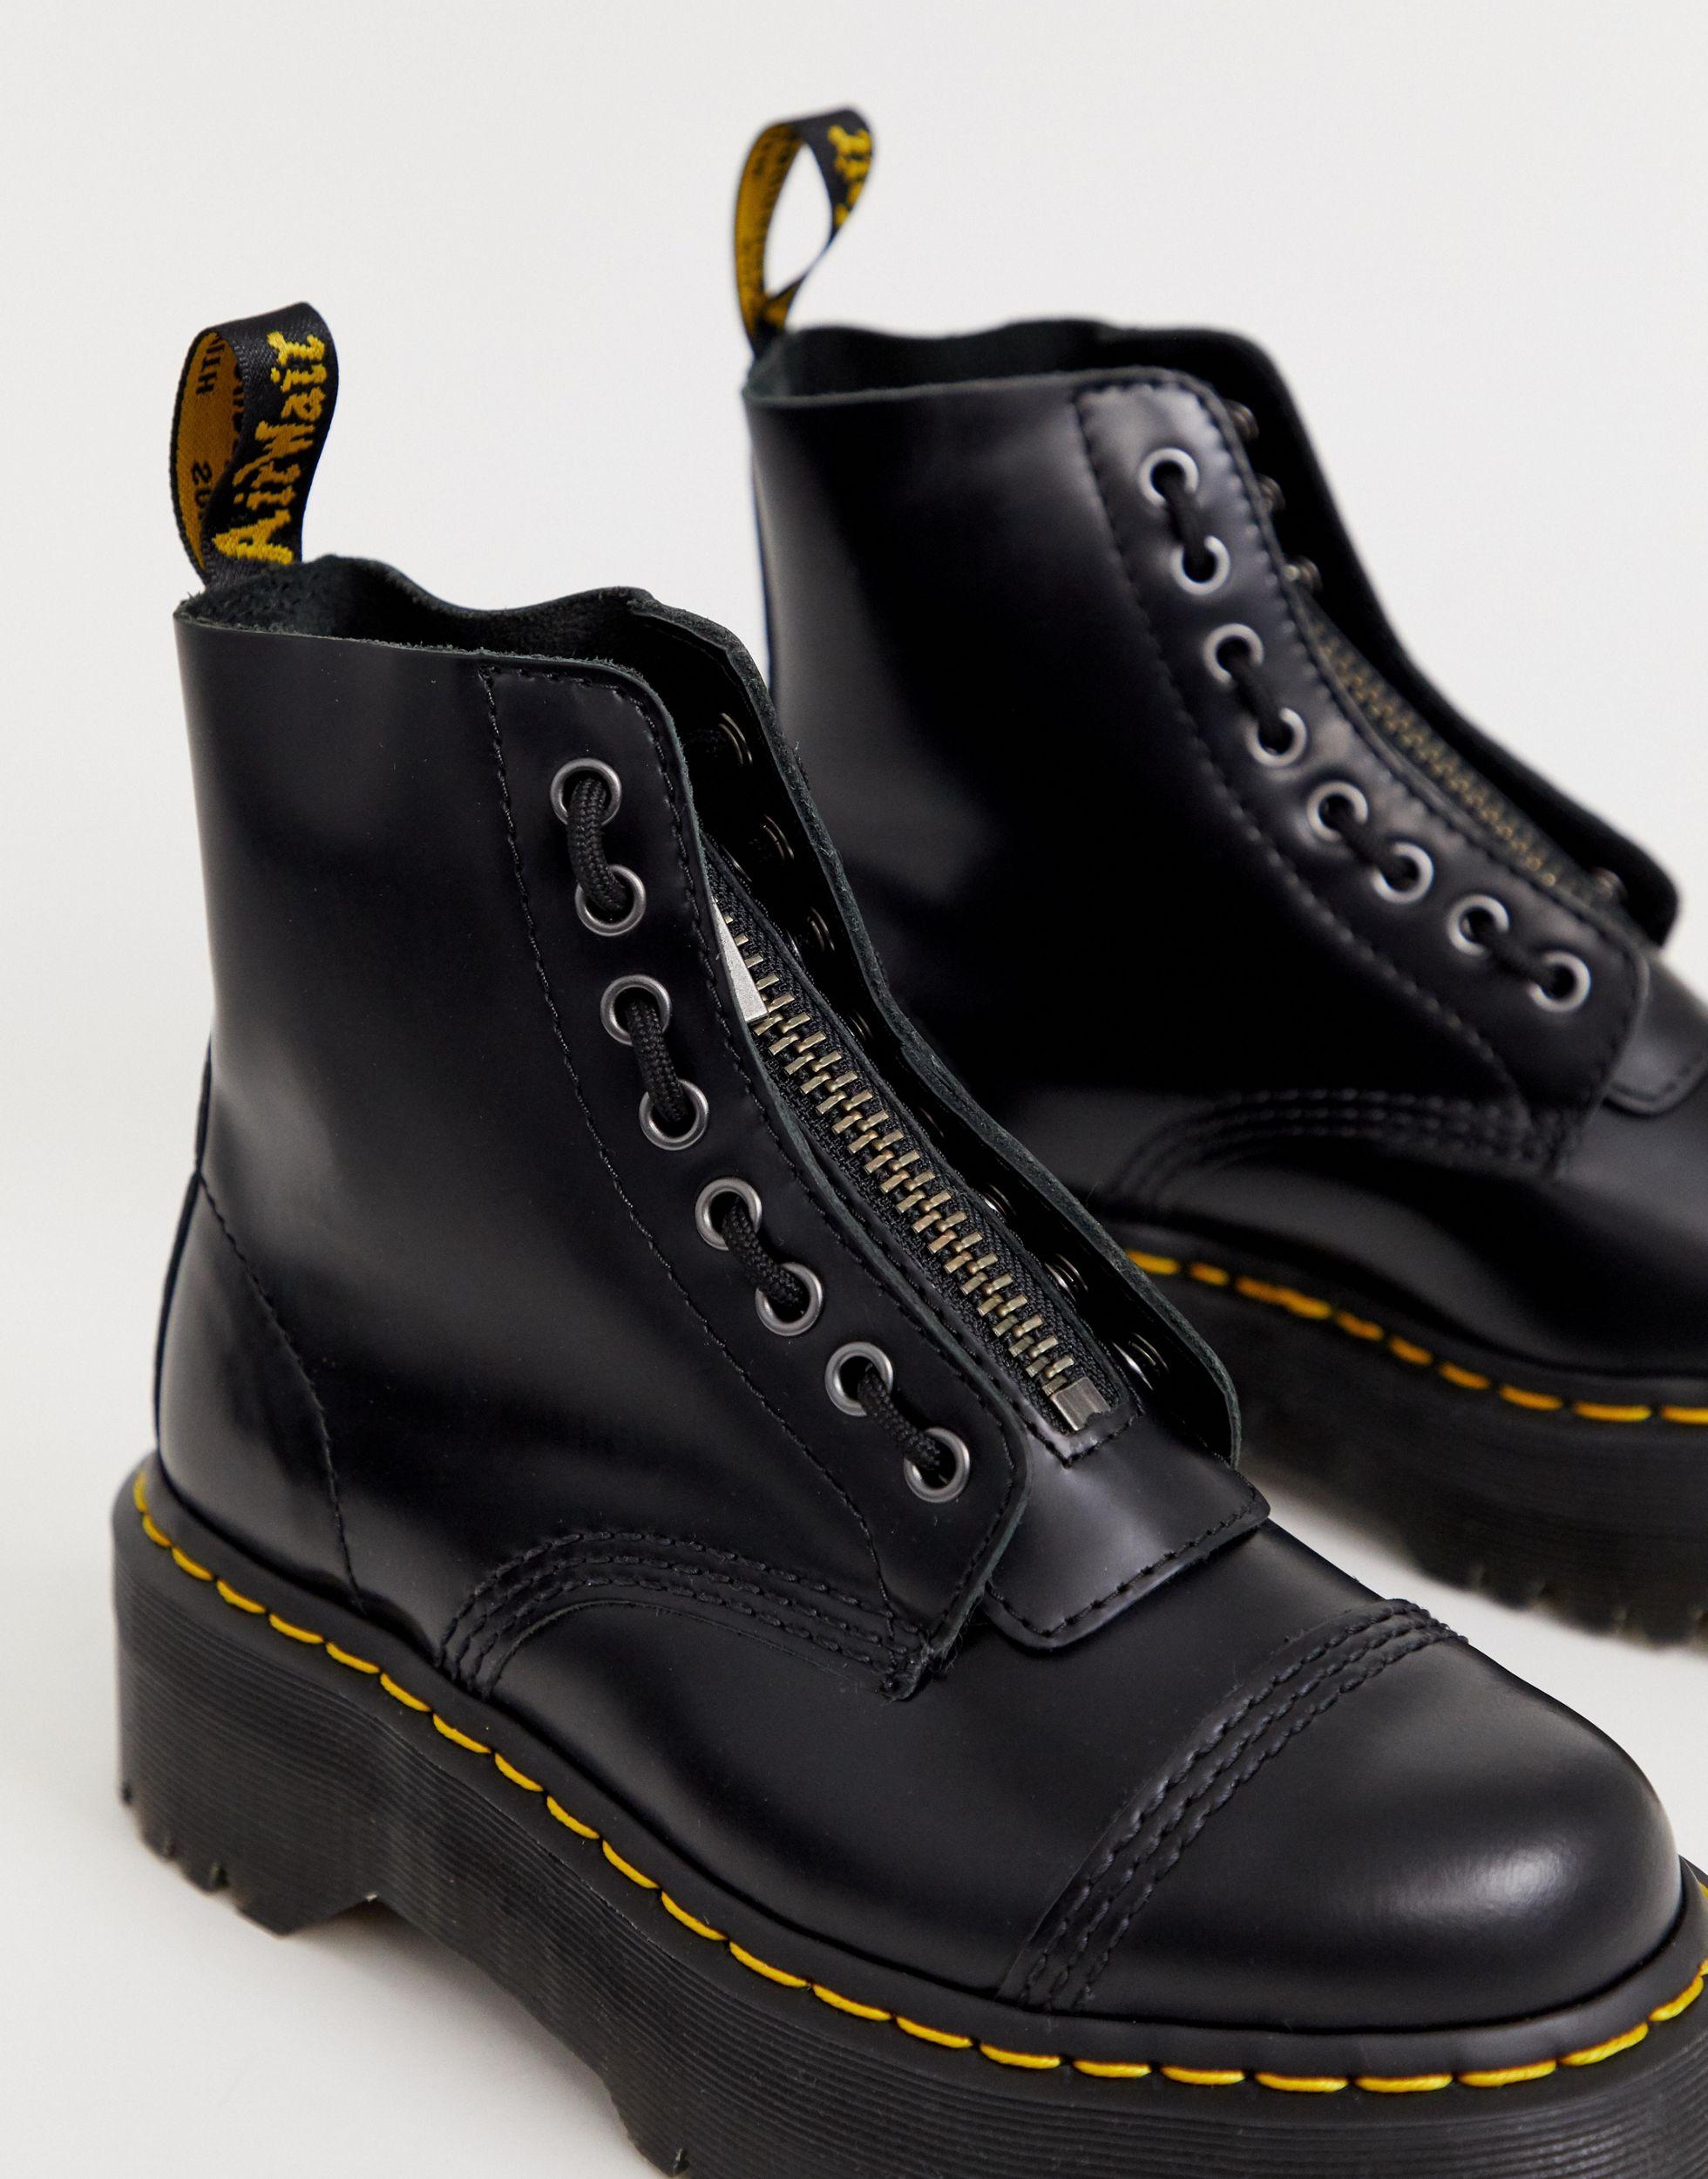 Buy > sinclair boots dr martens > in stock